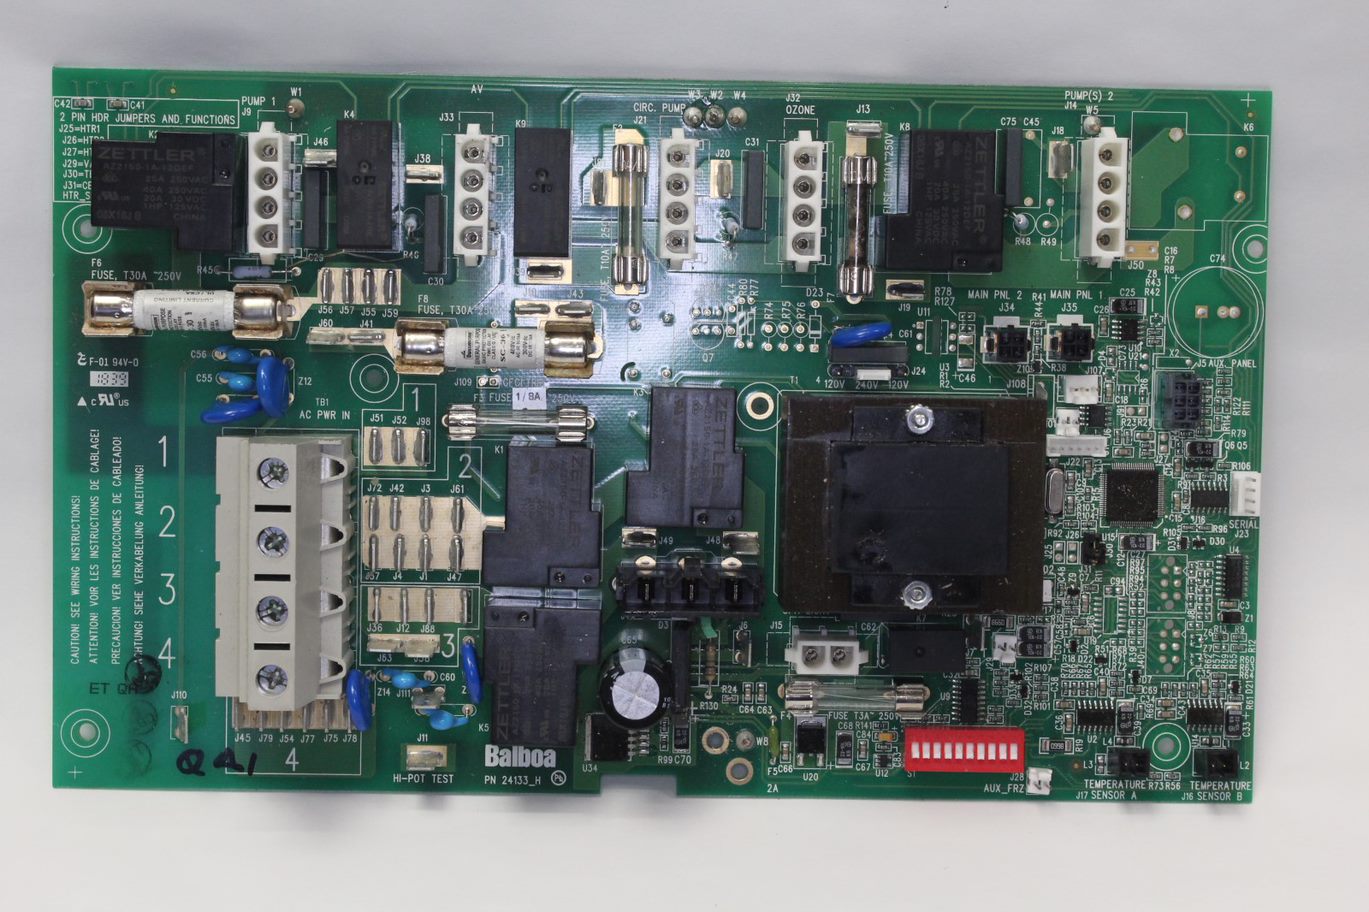 Circuit Board for CN6013X 3KW - (Part Number: 56867) Compatible Replacement for All BP600 Boards